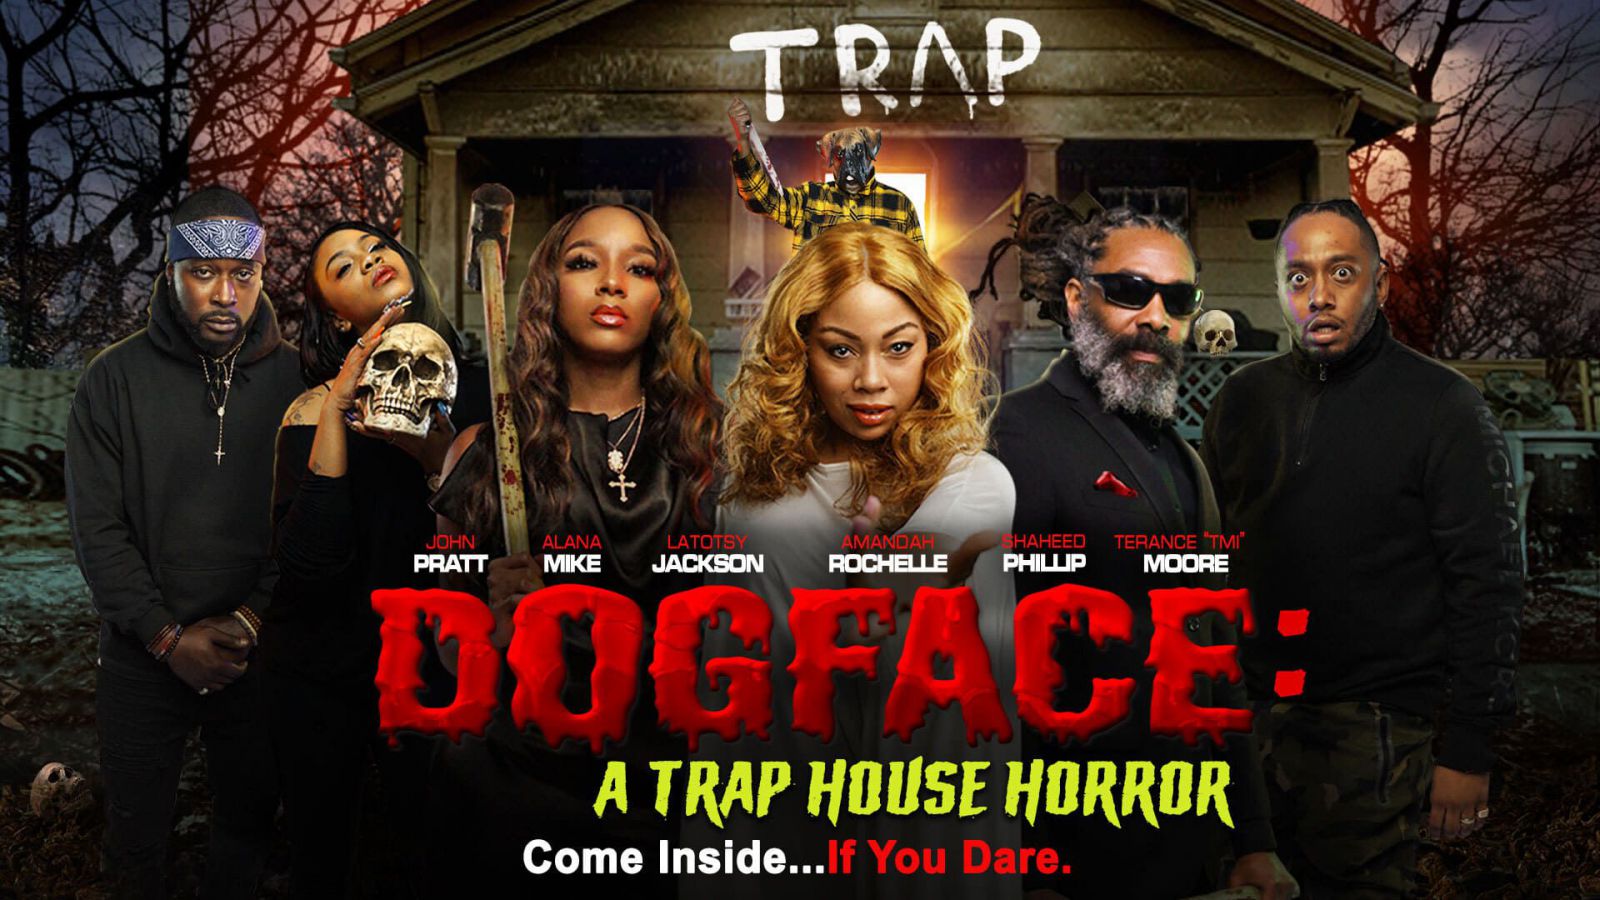 Horror Movies, Dogface A Trap House Horror 2021, Dogface A Trap House Horror, Dogface A Trap House Horror 2021 Full Movies, Dogface A Trap House Horror Full Movies, Watch Dogface A Trap House Horror 2021 free online, Watch movies Dogface A Trap House Horror 2021 free online, Watch film Dogface A Trap House Horror free online, Watch full movies Dogface A Trap House Horror free online, Watch Dogface A Trap House Horror free online, Watch full film Dogface A Trap House Horror free online